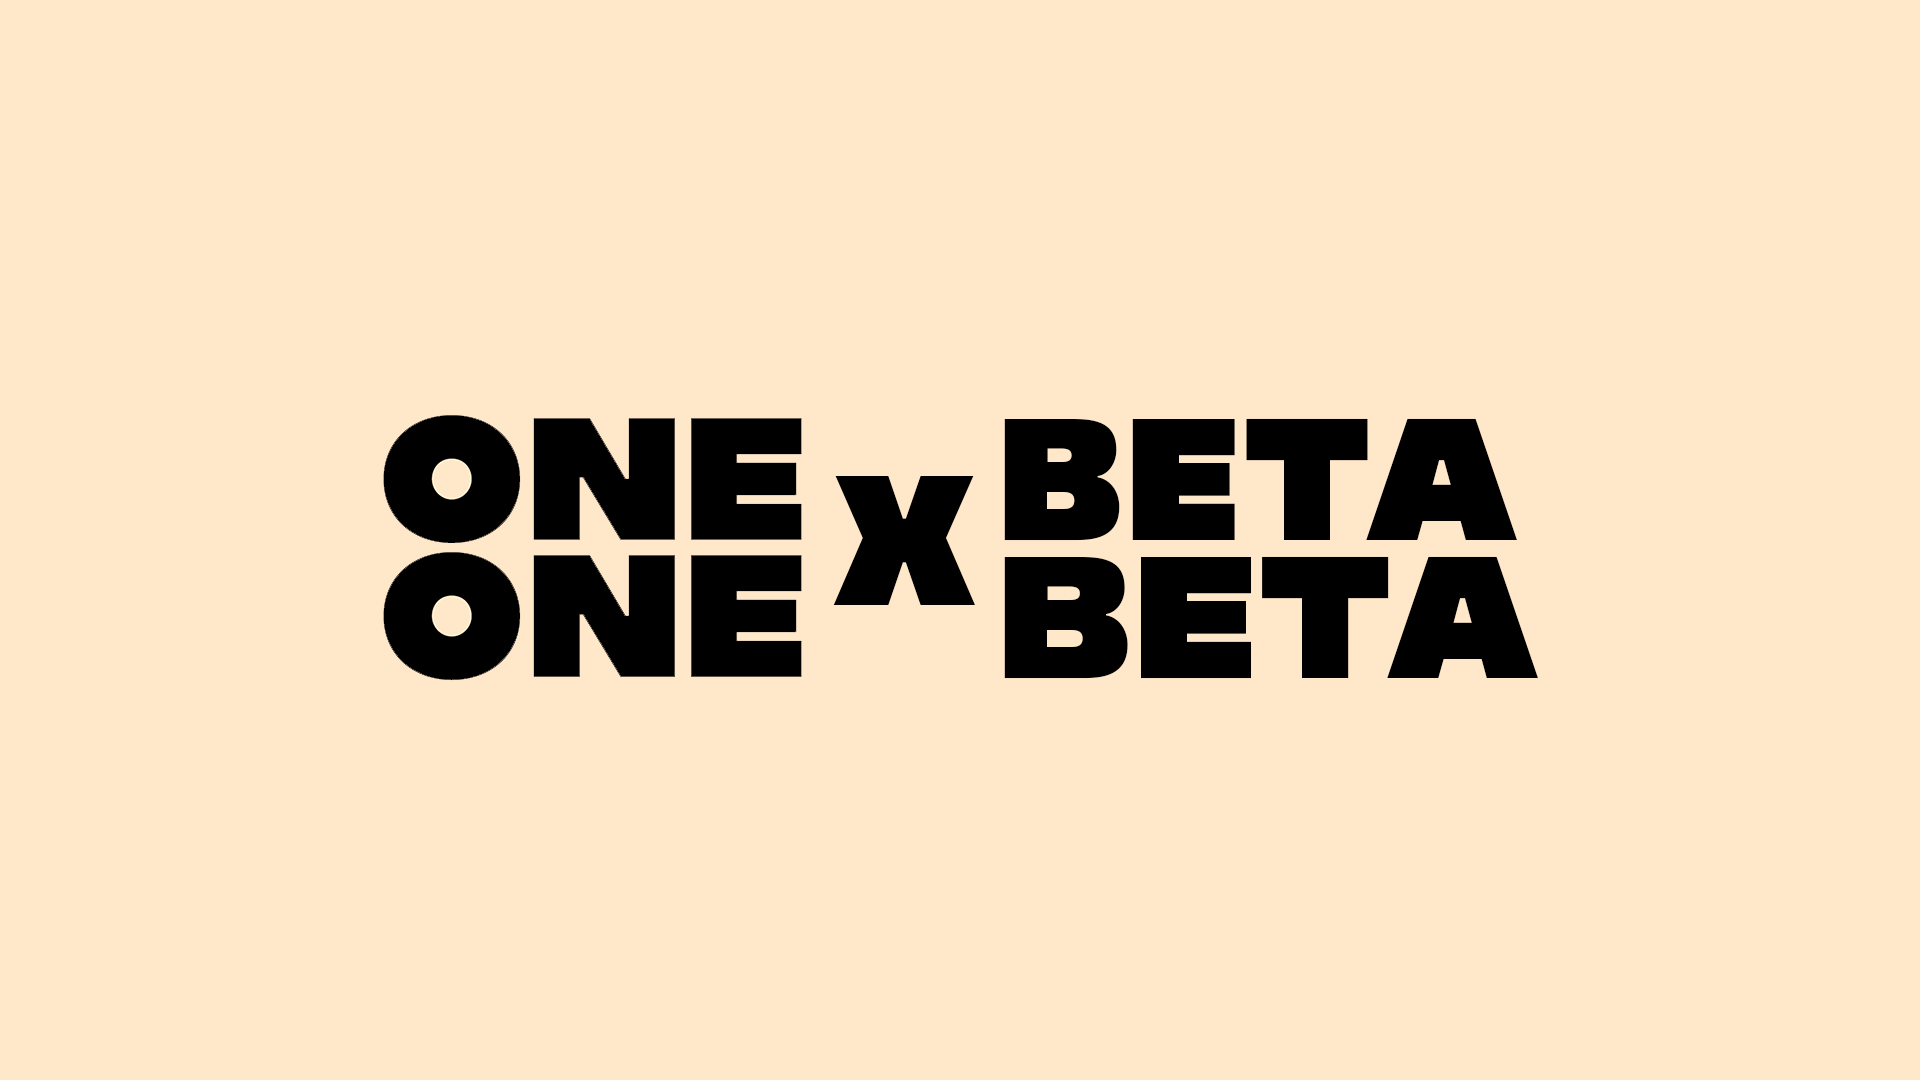 One By One is now out for beta testing.